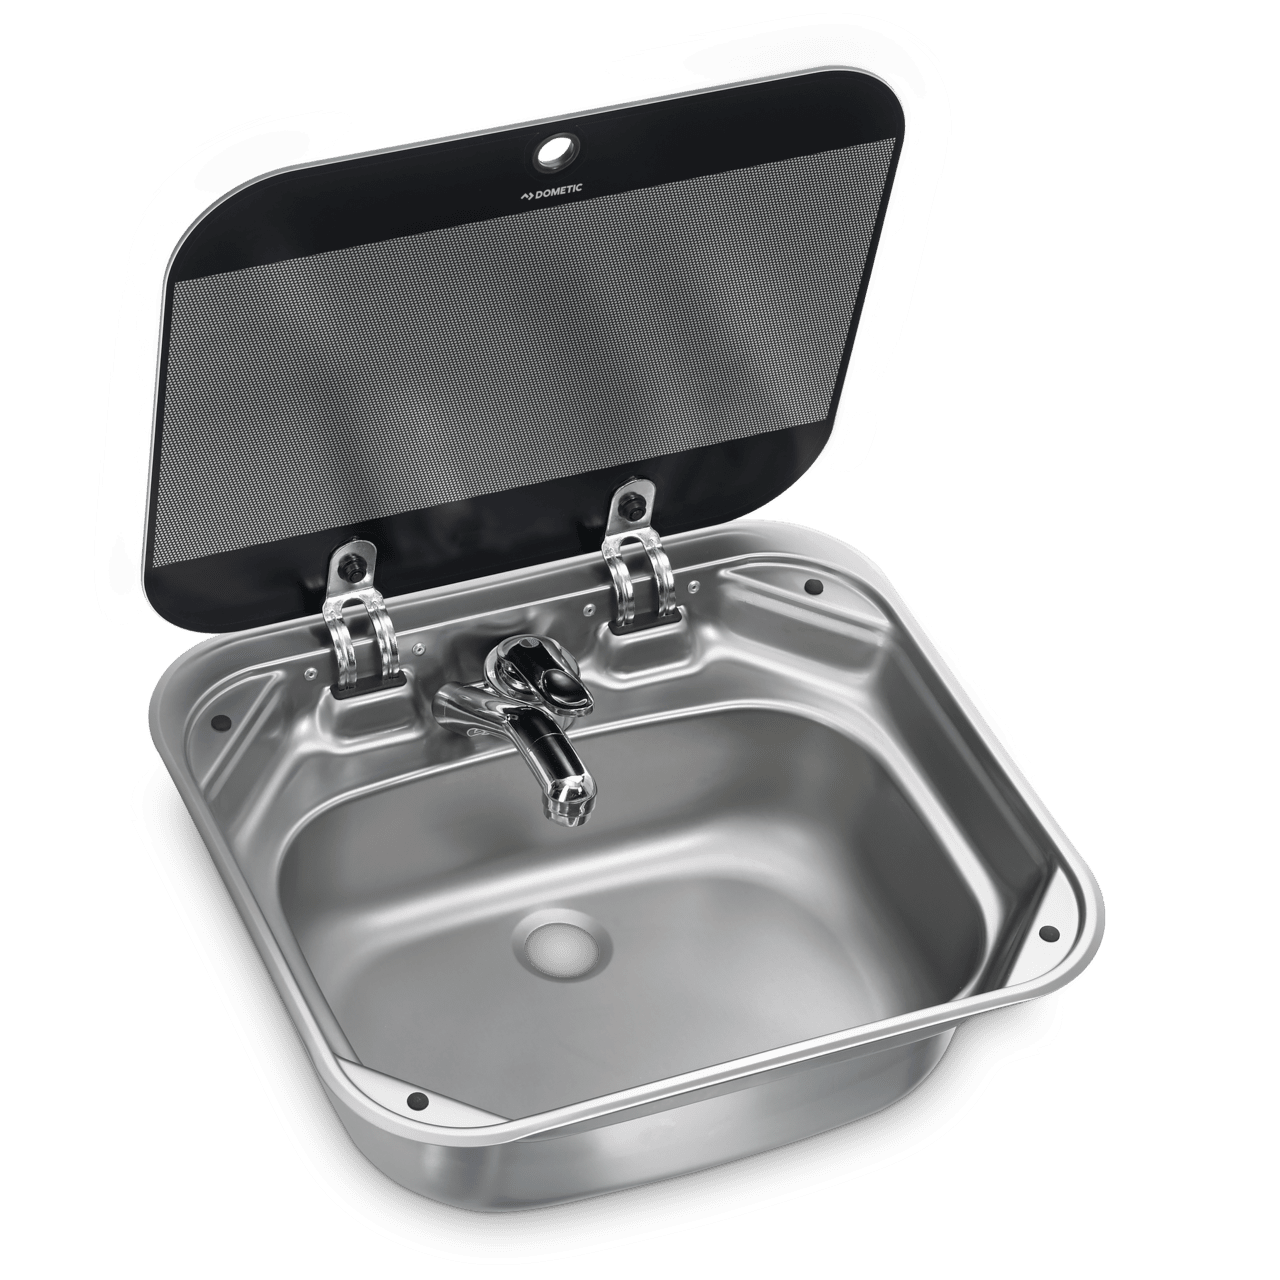 Dometic Square Stainless Steel Sink with Glass Lid Sink (146.5 x 420 x 370mm).